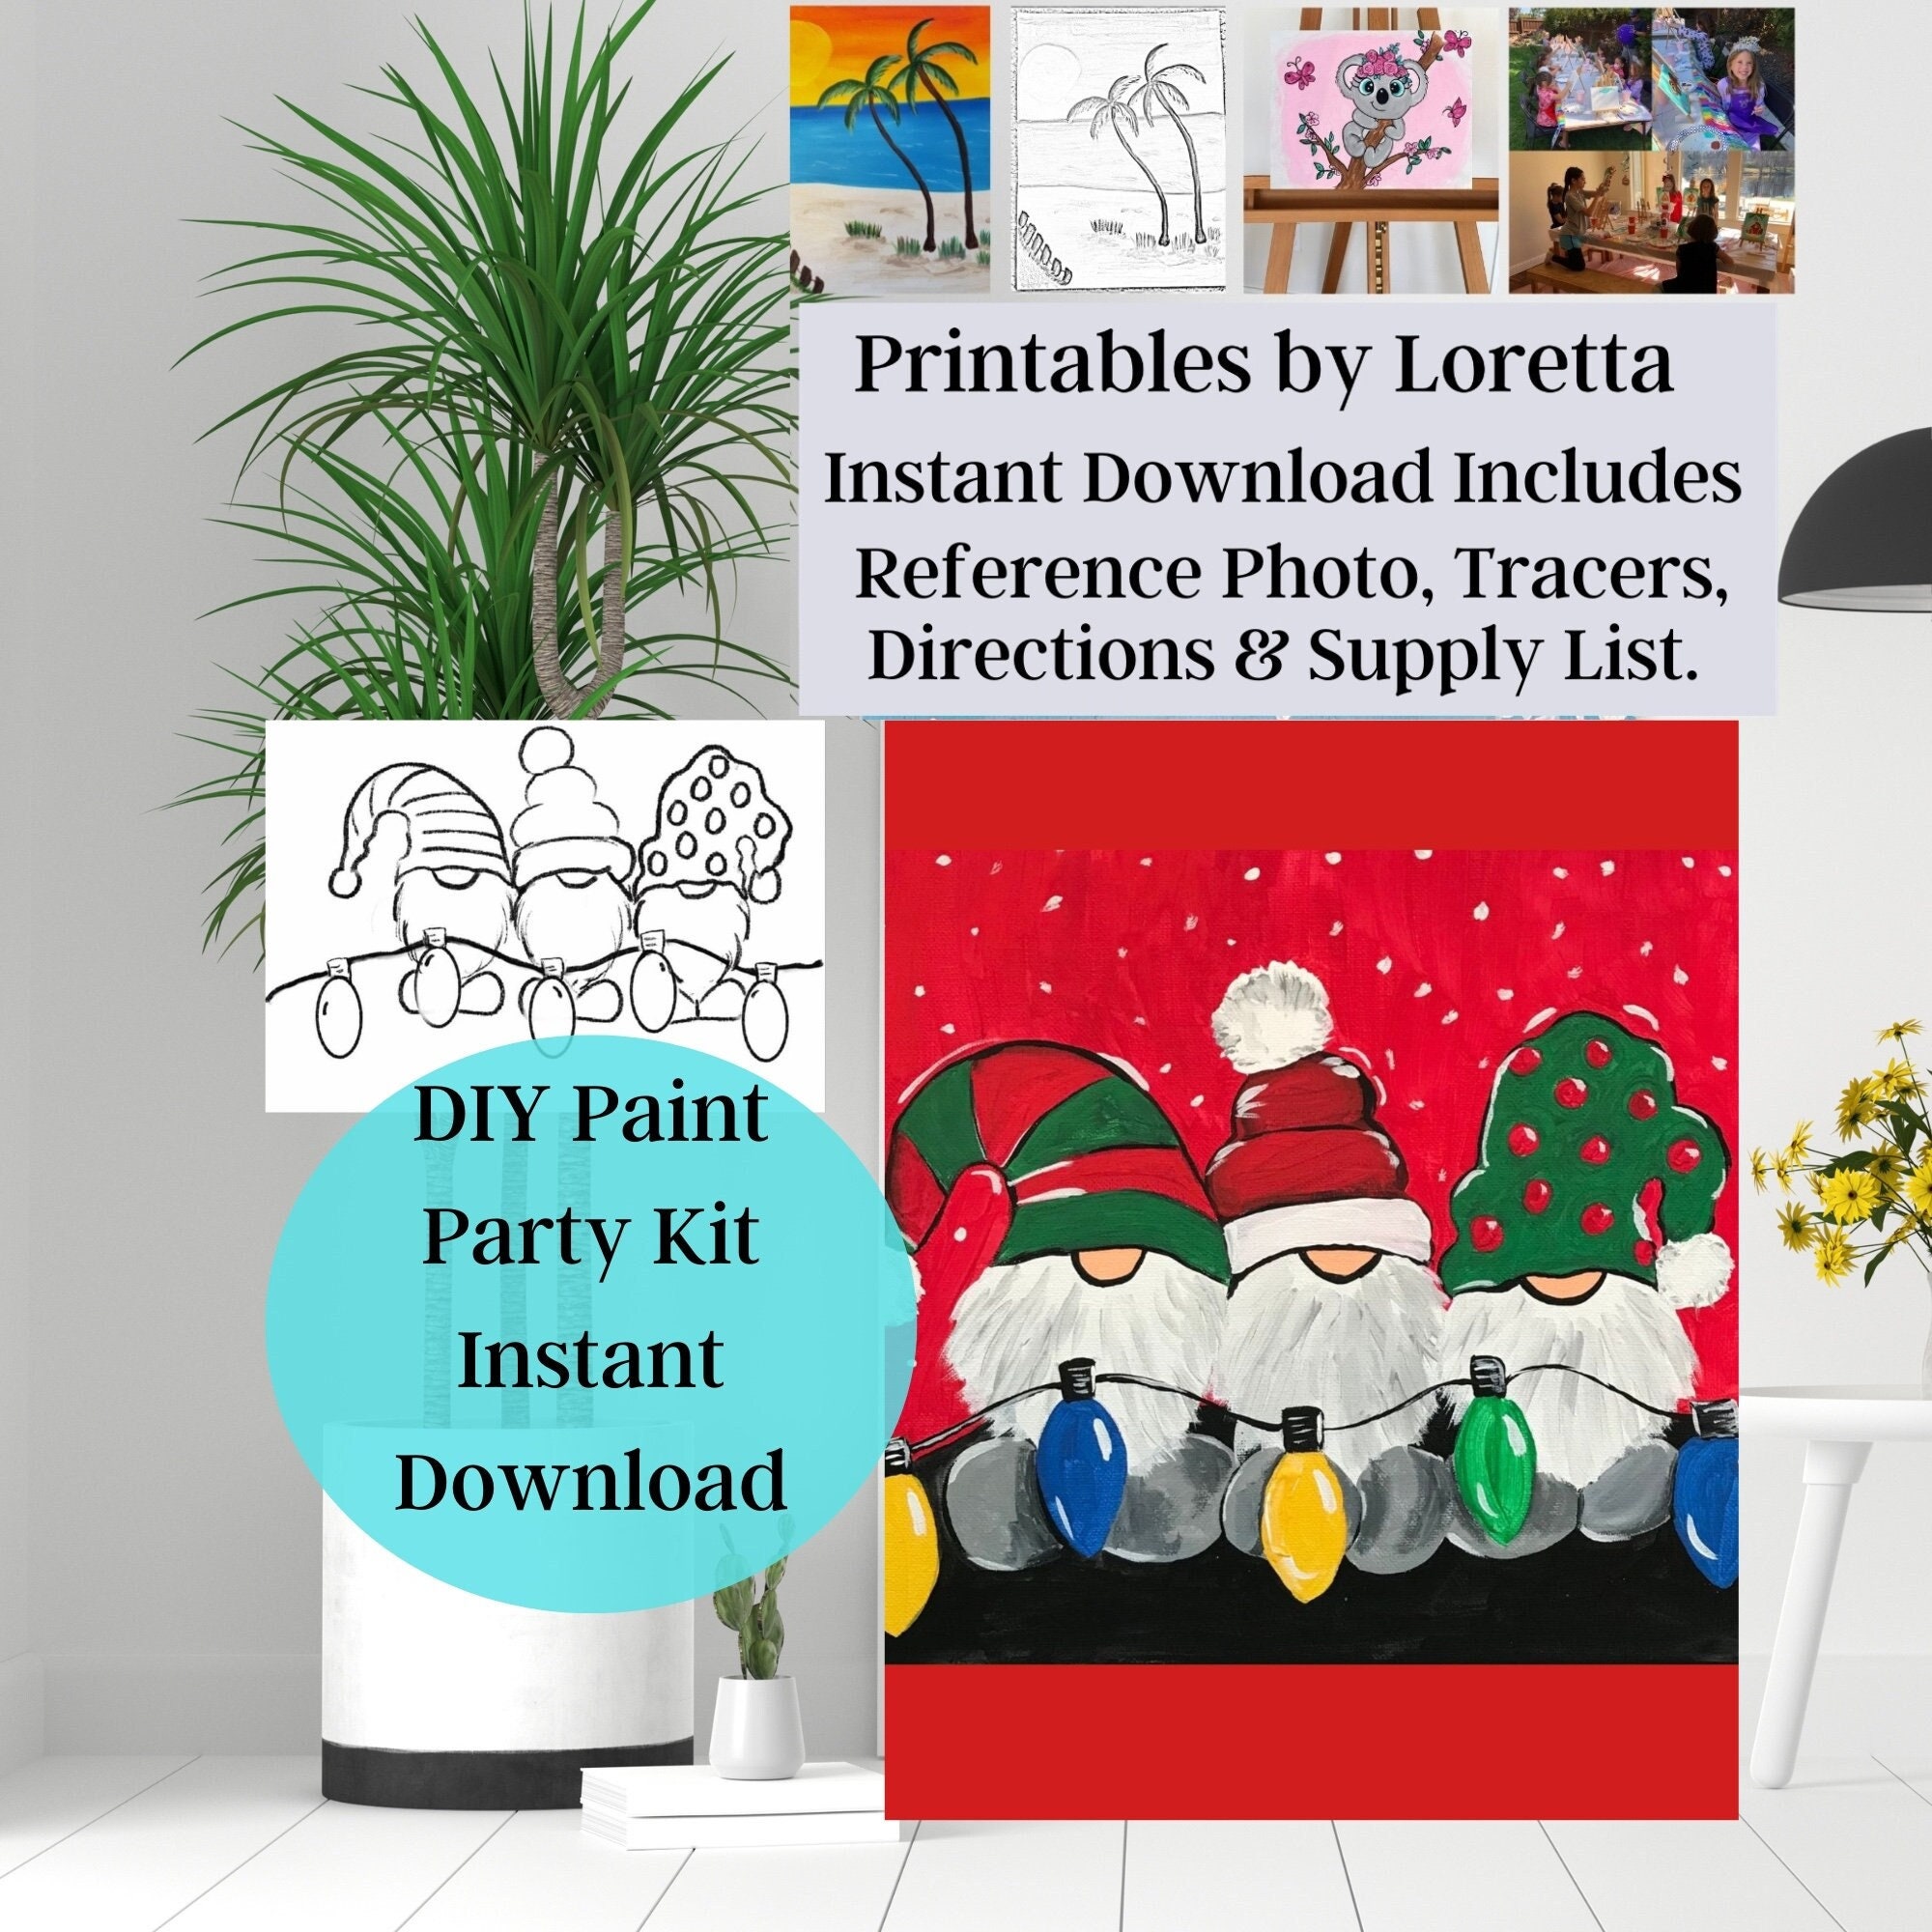 DIY Paint Party Kit Instant Download Three Christmas Gnomes for Paint Party  Includes Tracer, Step by Step Instructions & Supply List. 